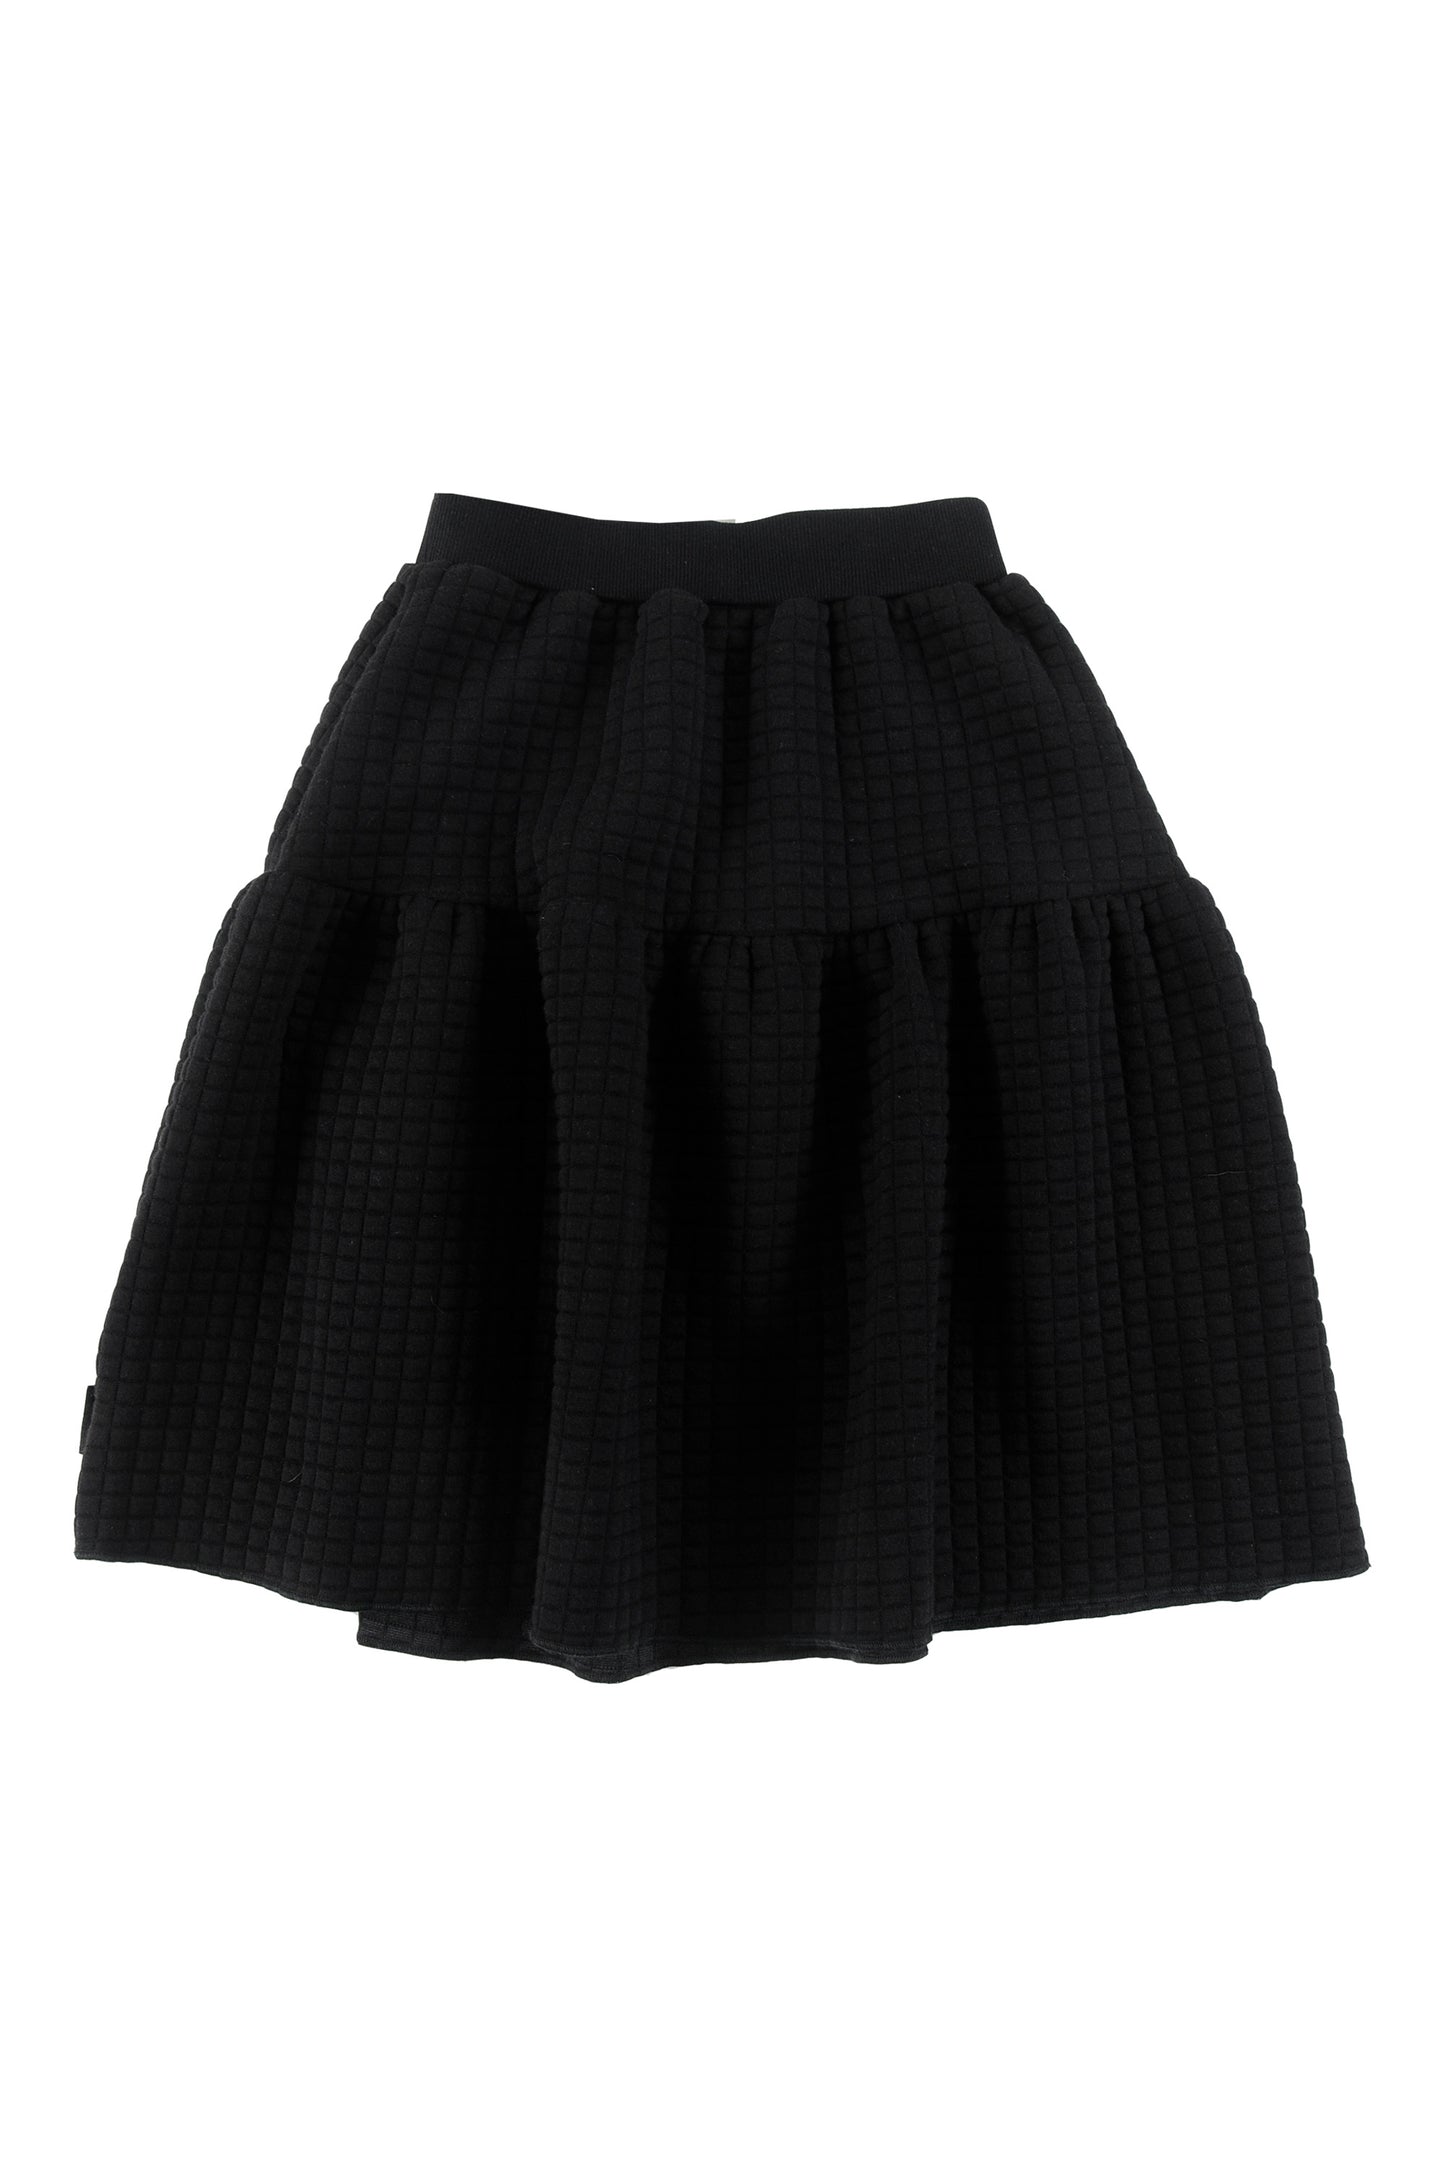 LOUD BLACK QUILTED SKIRT